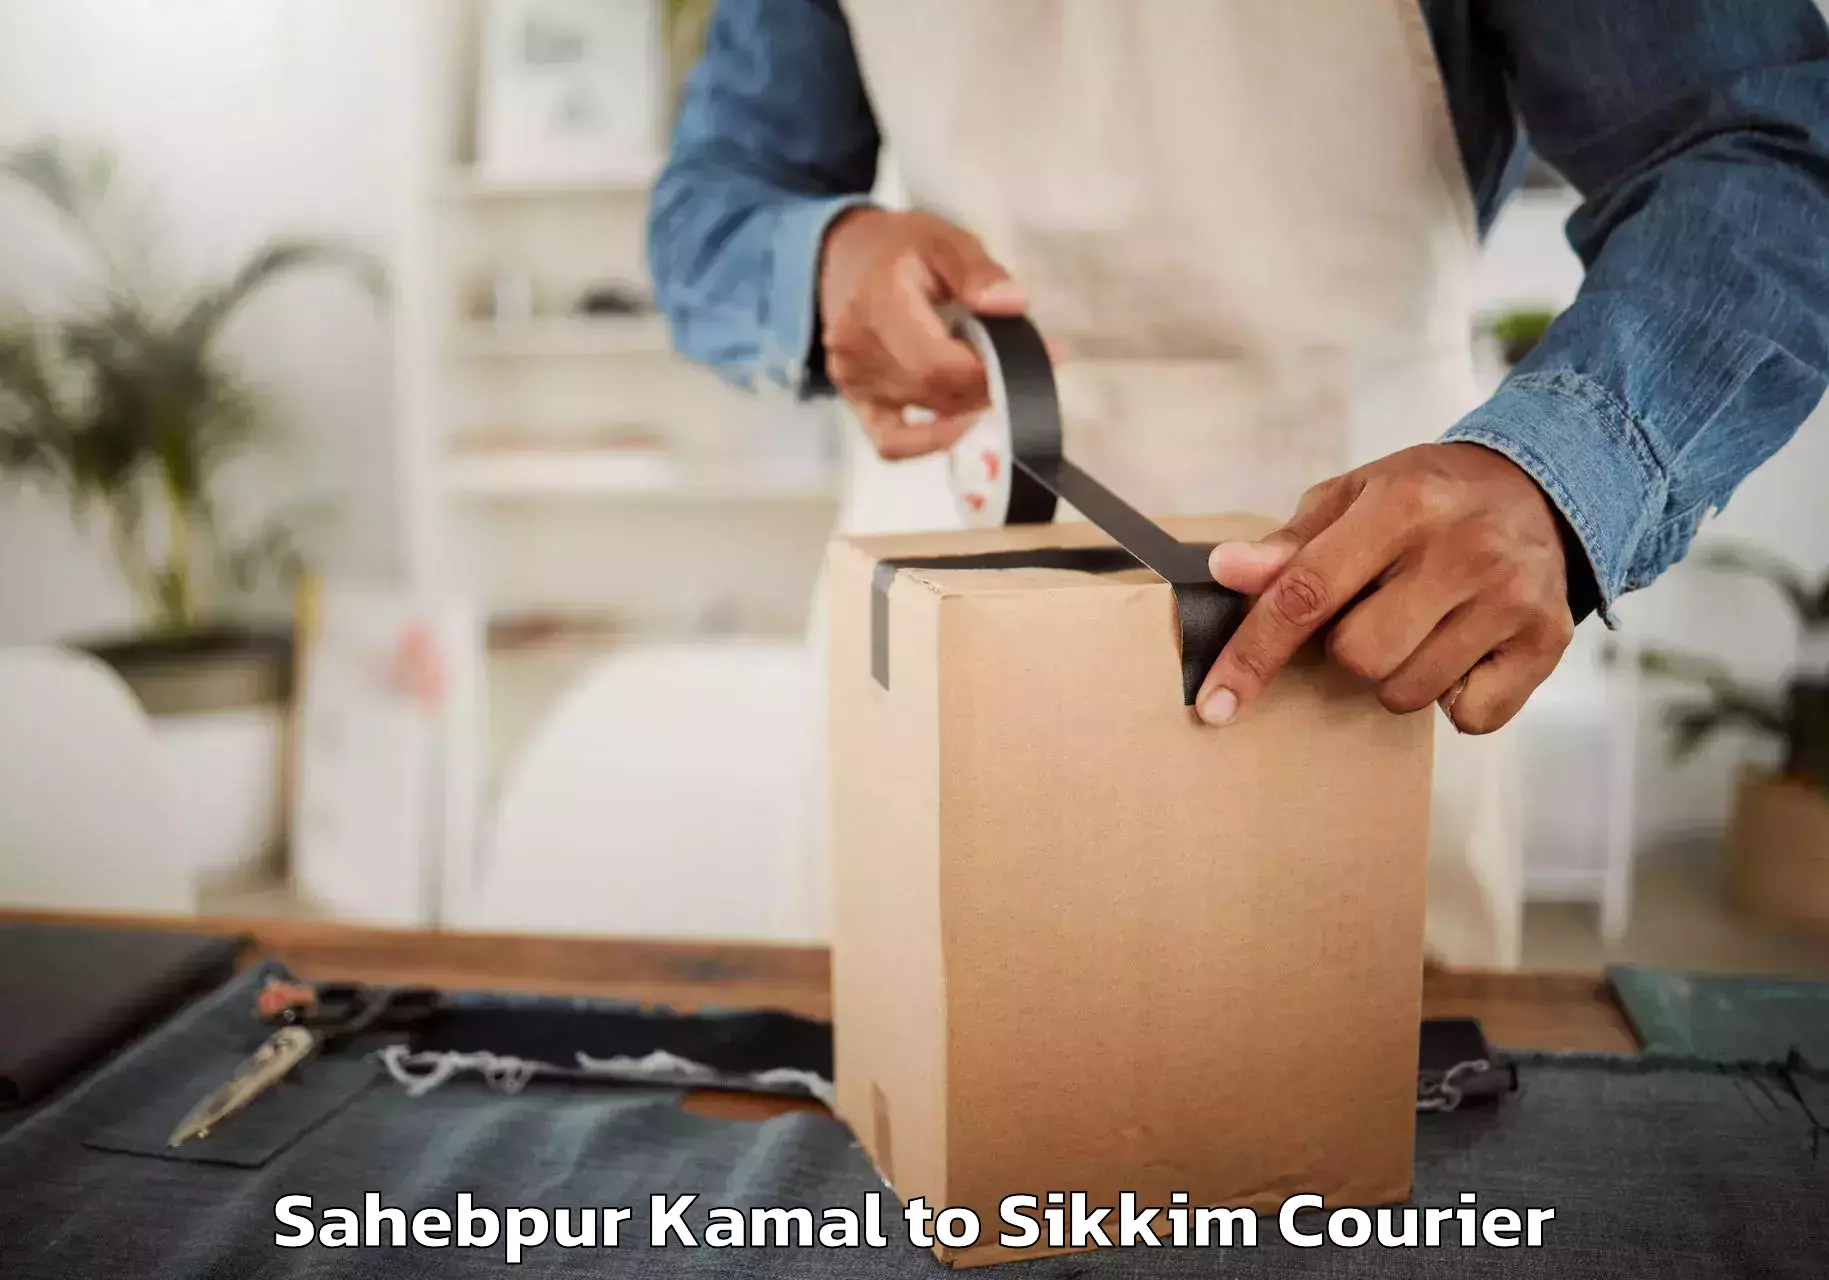 Moving and packing experts Sahebpur Kamal to Sikkim